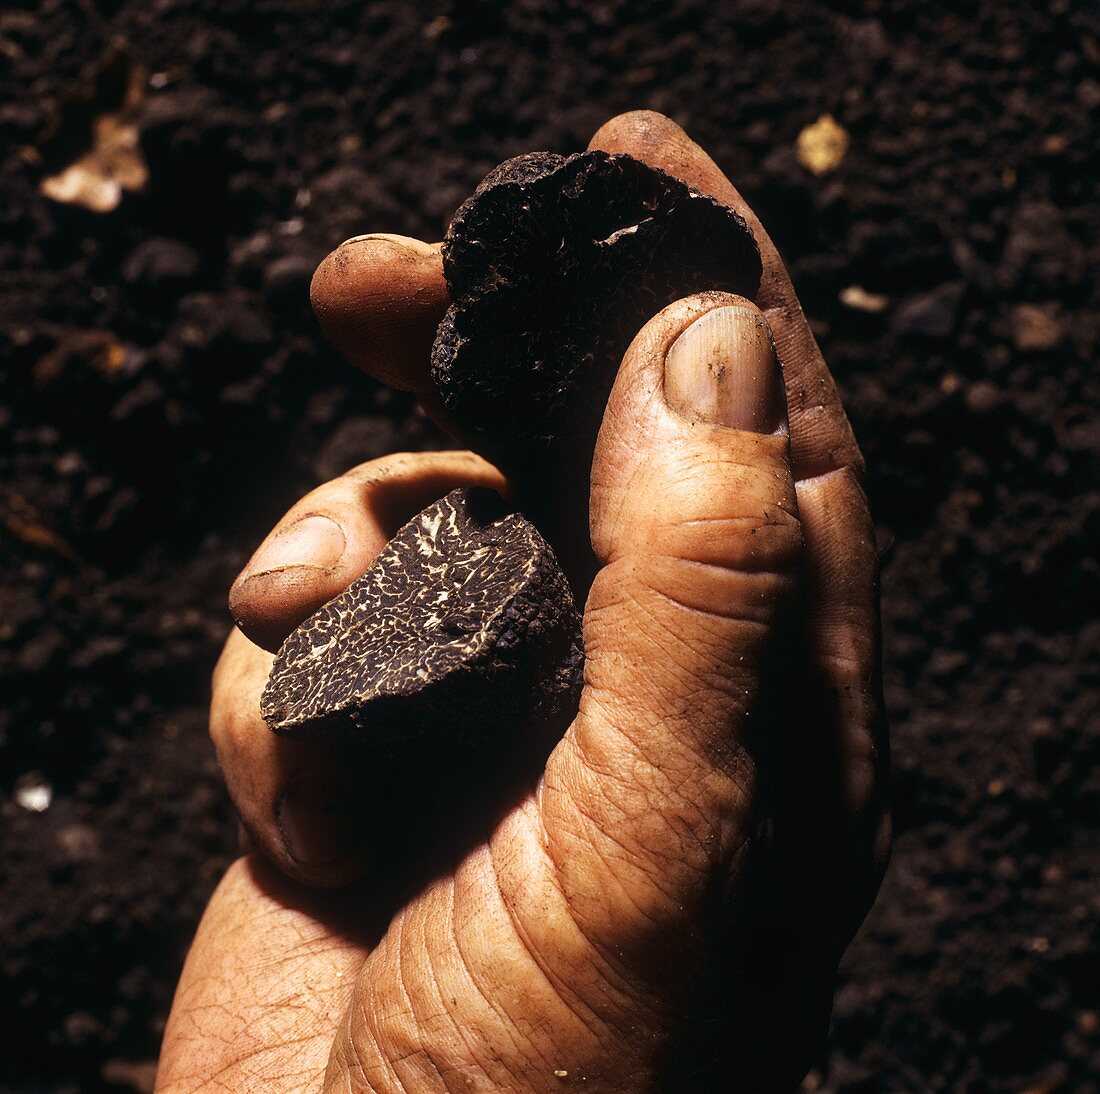 Hand holding a halved black truffle above soil